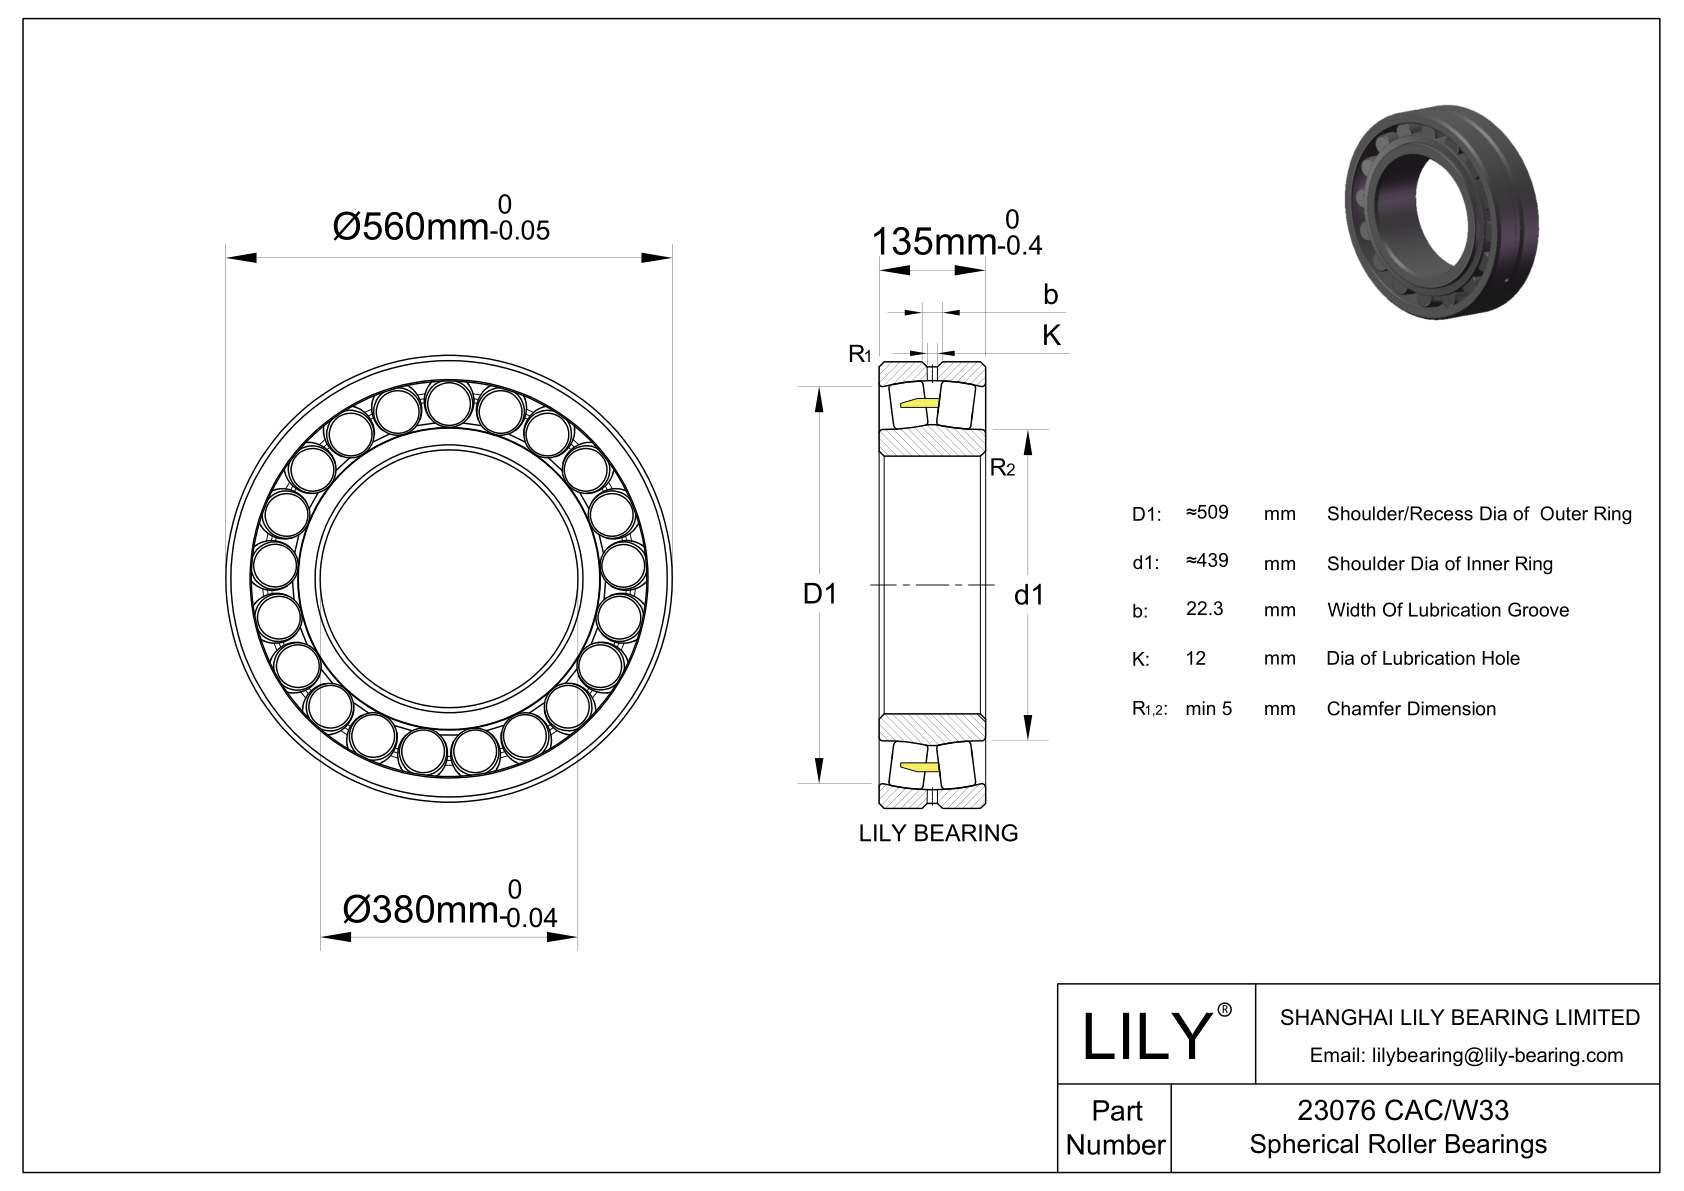 23076 CAC/W33 Double Row Spherical Roller Bearing cad drawing